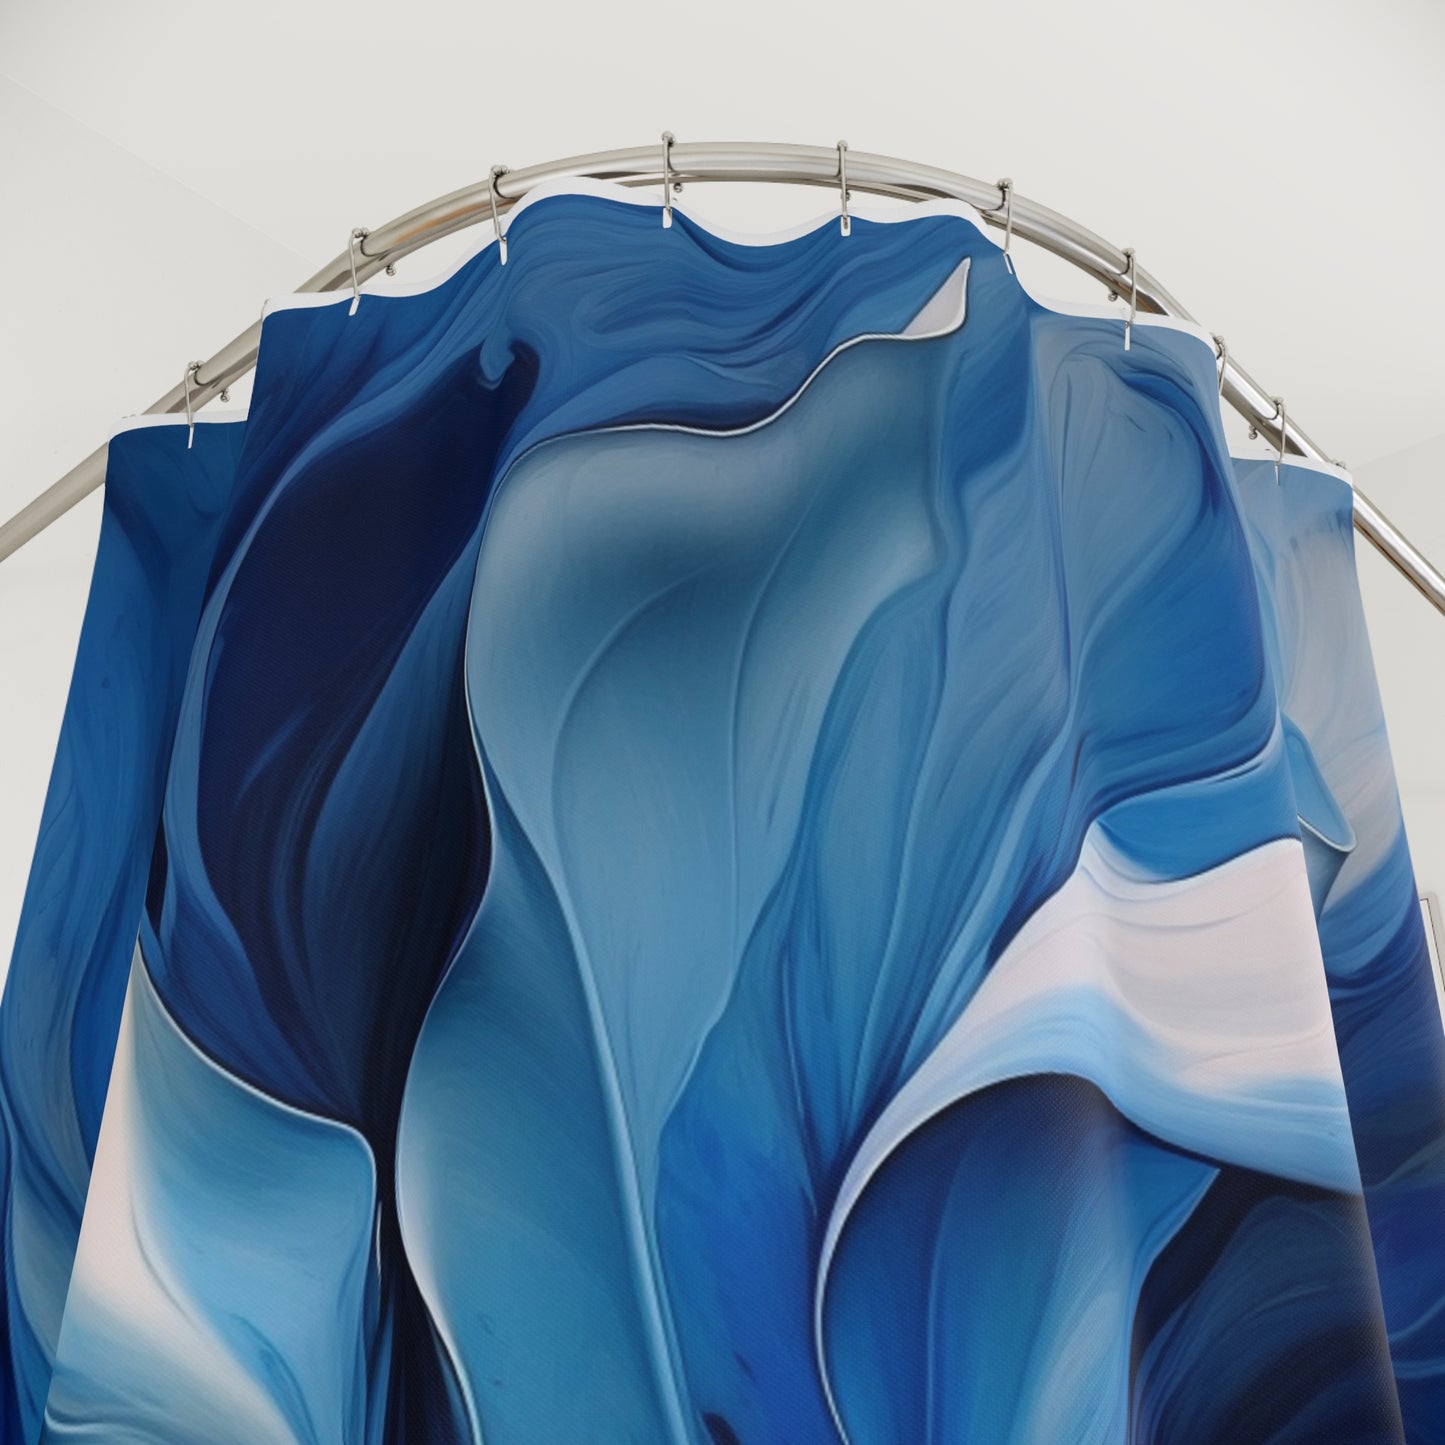 Polyester Shower Curtain Abstract Blue Tulip 4